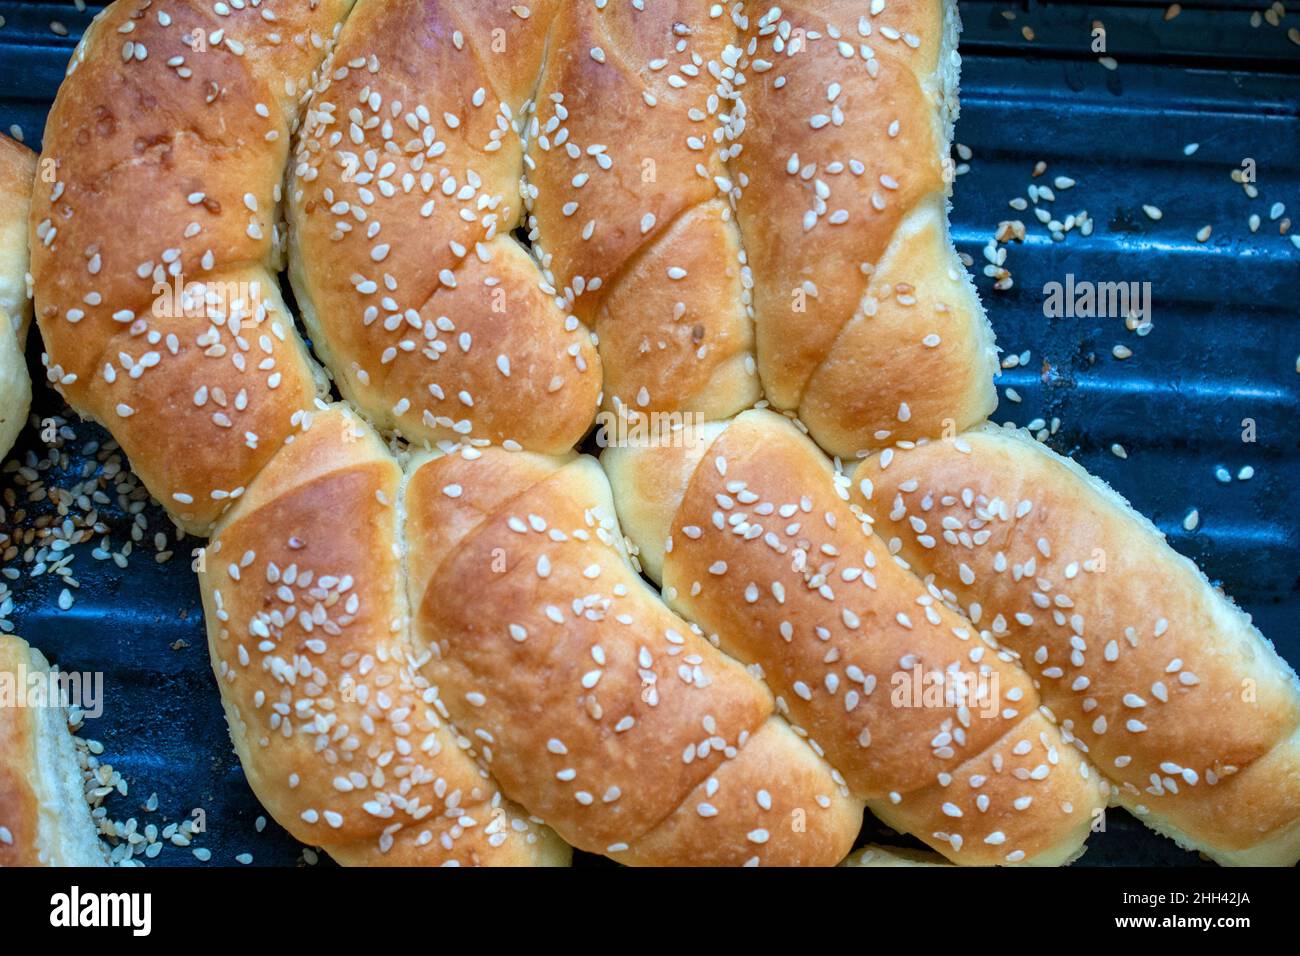 Homemade fresh baked Bread Rolls with Sesame Seeds close up, top view. Stock Photo